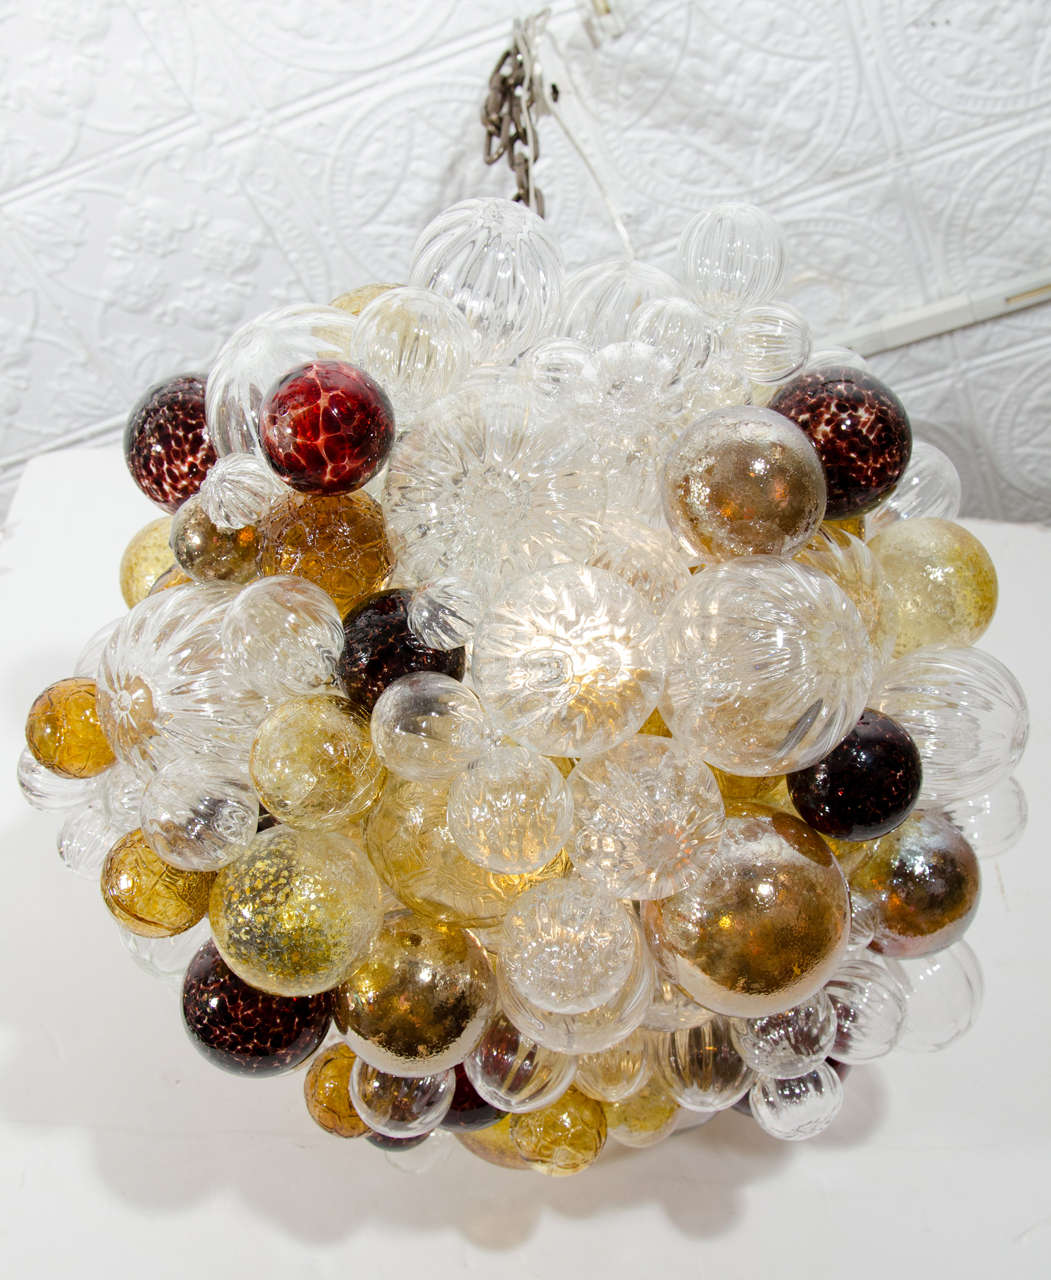 Hand blown glass bubbles in various shades of red, amber and clear, with an adjustable cable and canopy.
Wired and ready to hang.